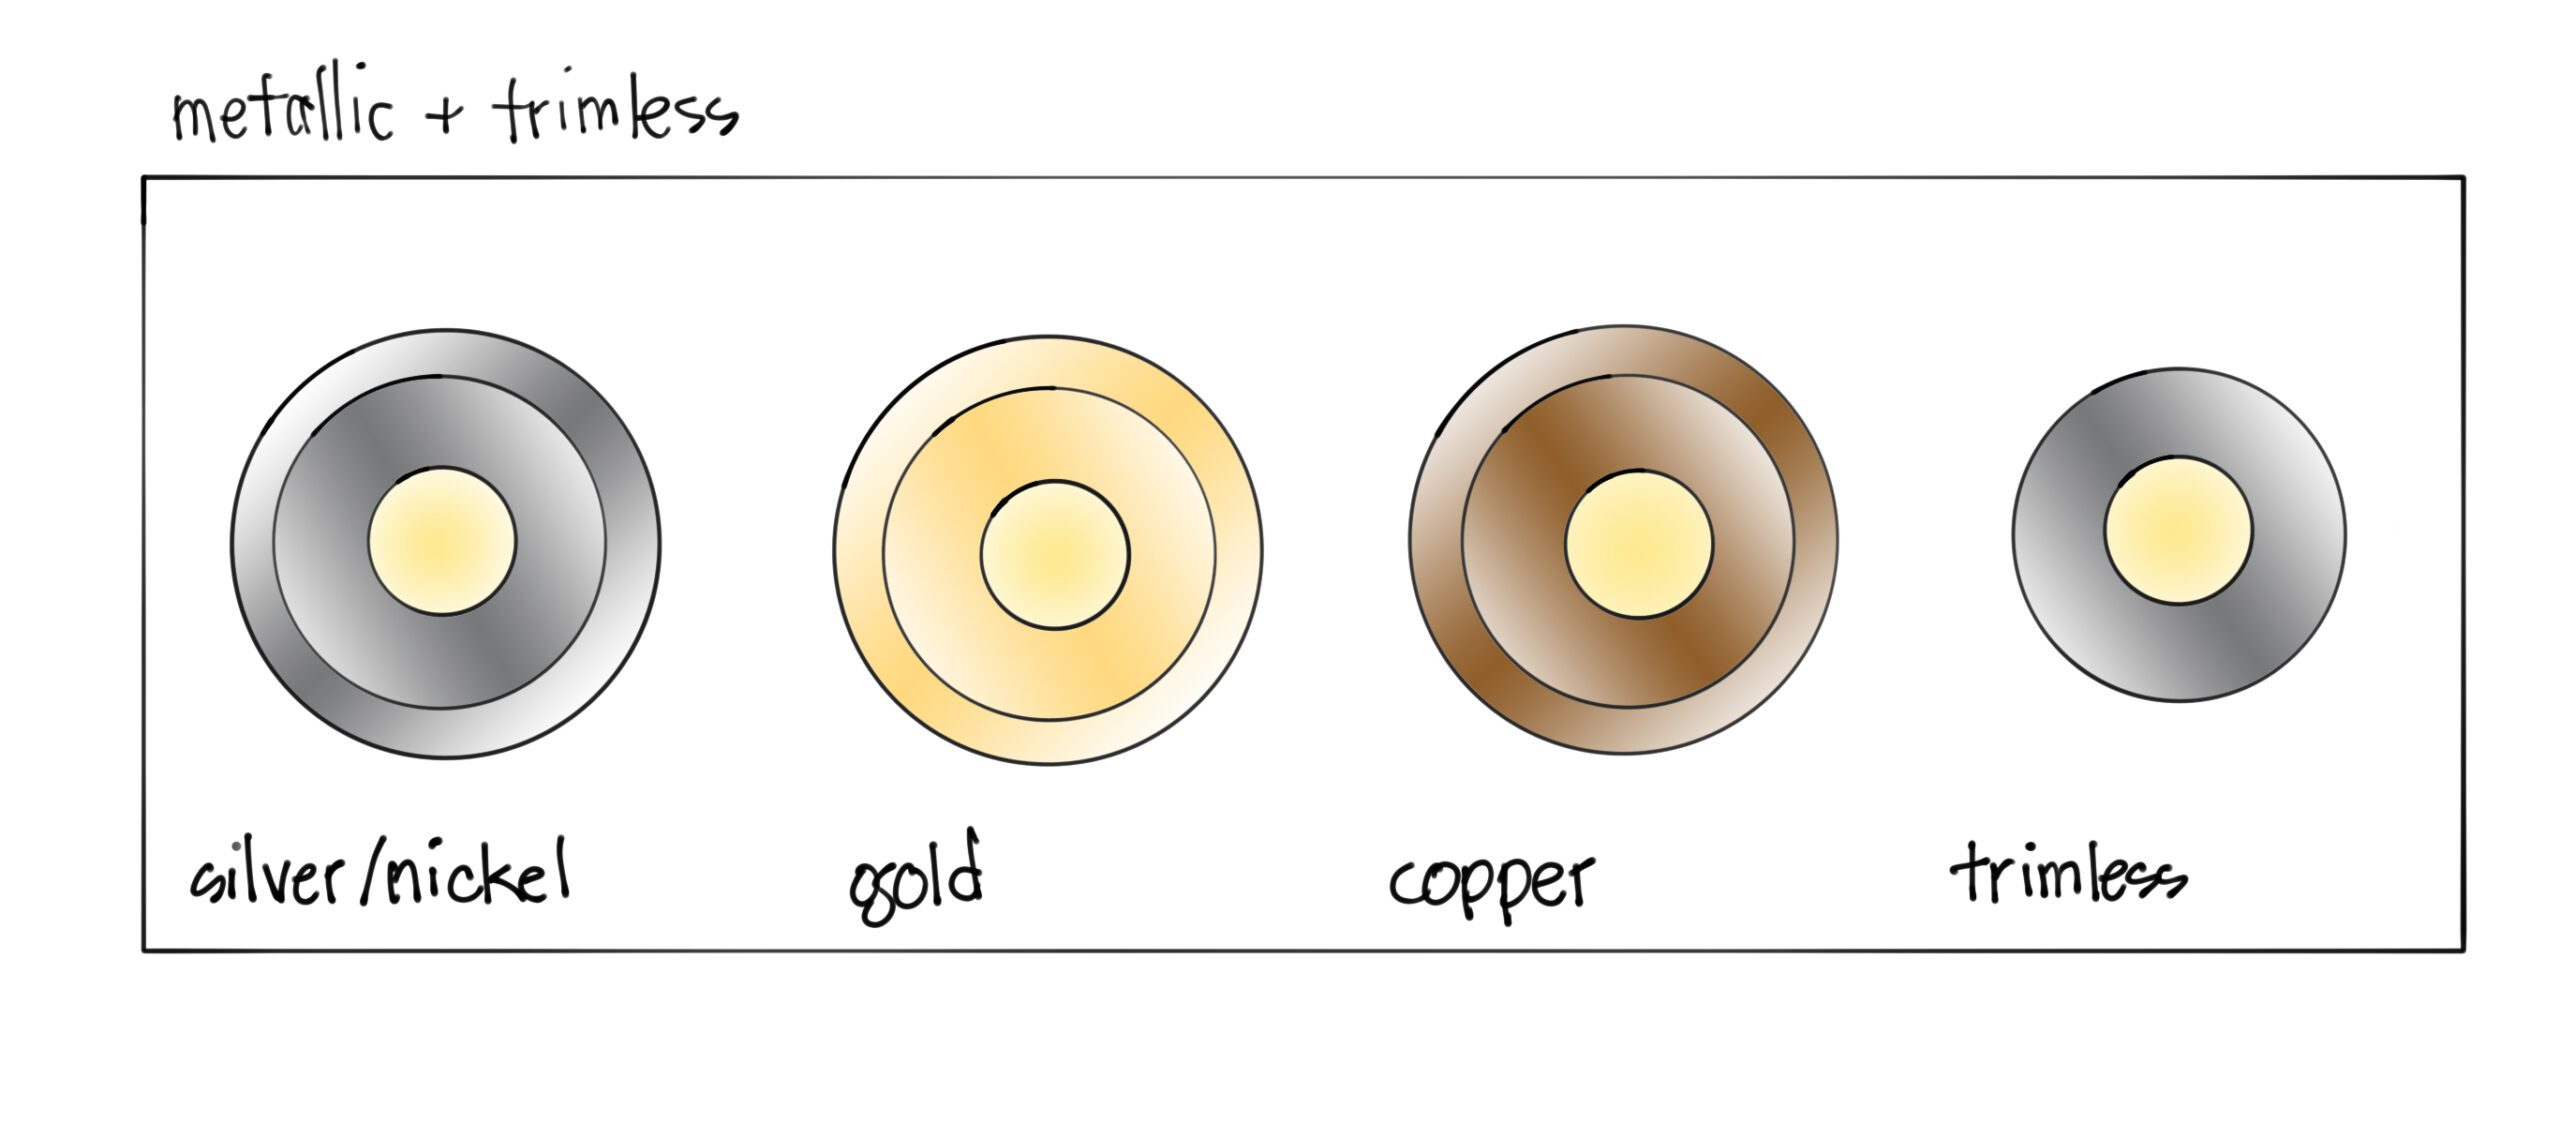 An illustrated diagram showcases four different metals and trims: silver/nickel, gold, copper, and trimless.